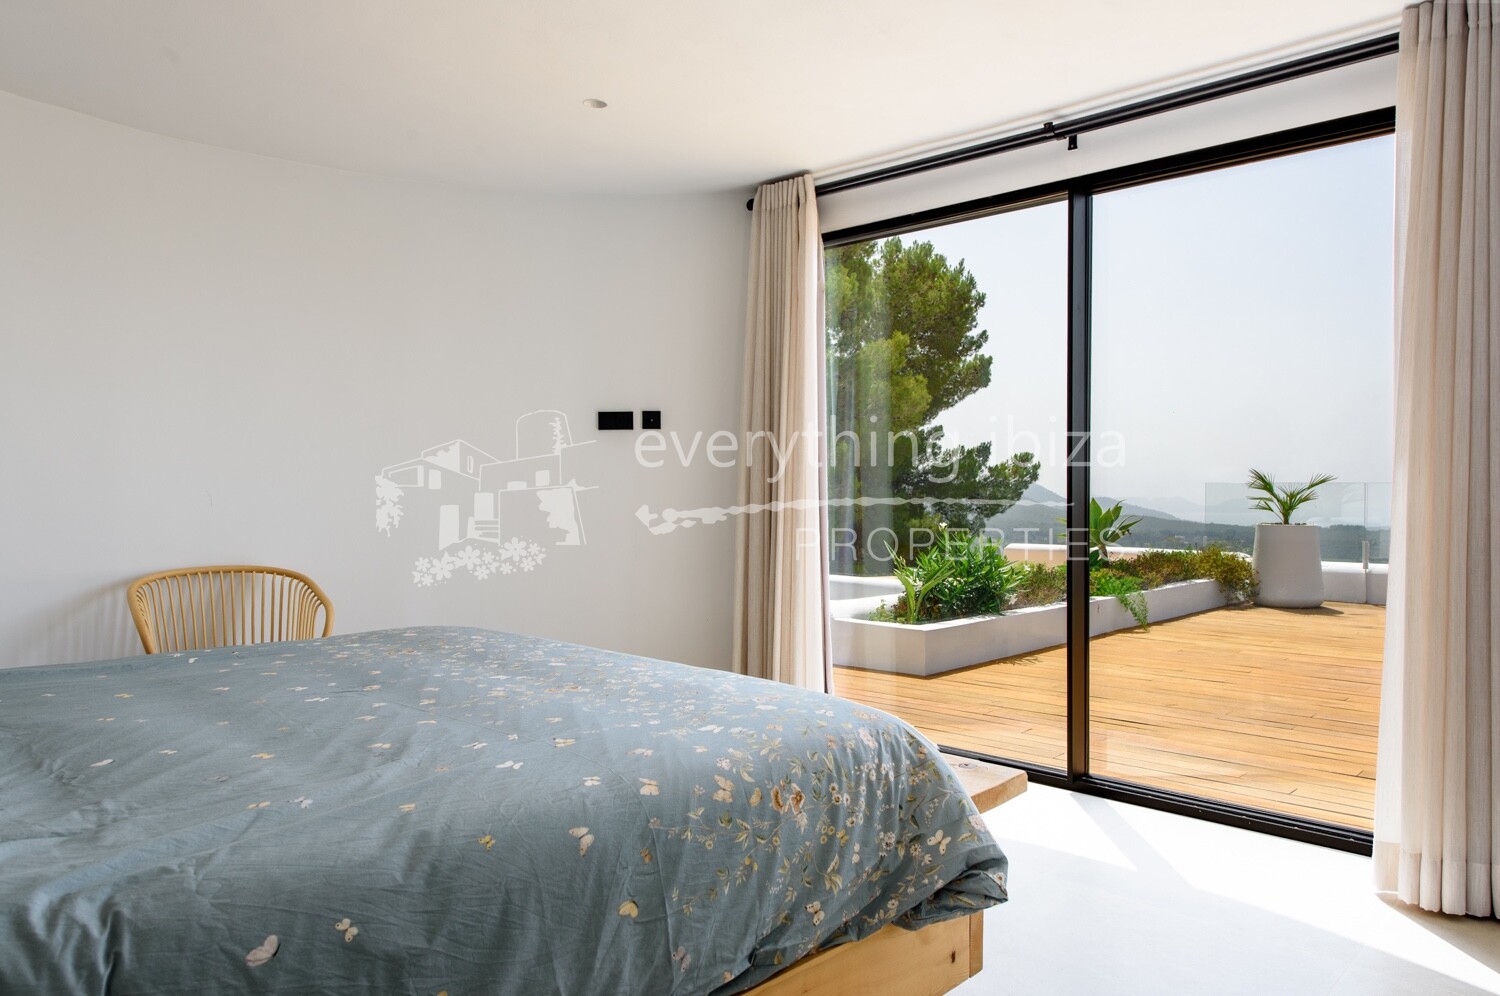 Magnificent Contemporary Villa Boasting Stunning Sea Views, ref. 1614, for sale in Ibiza by everything ibiza Properties